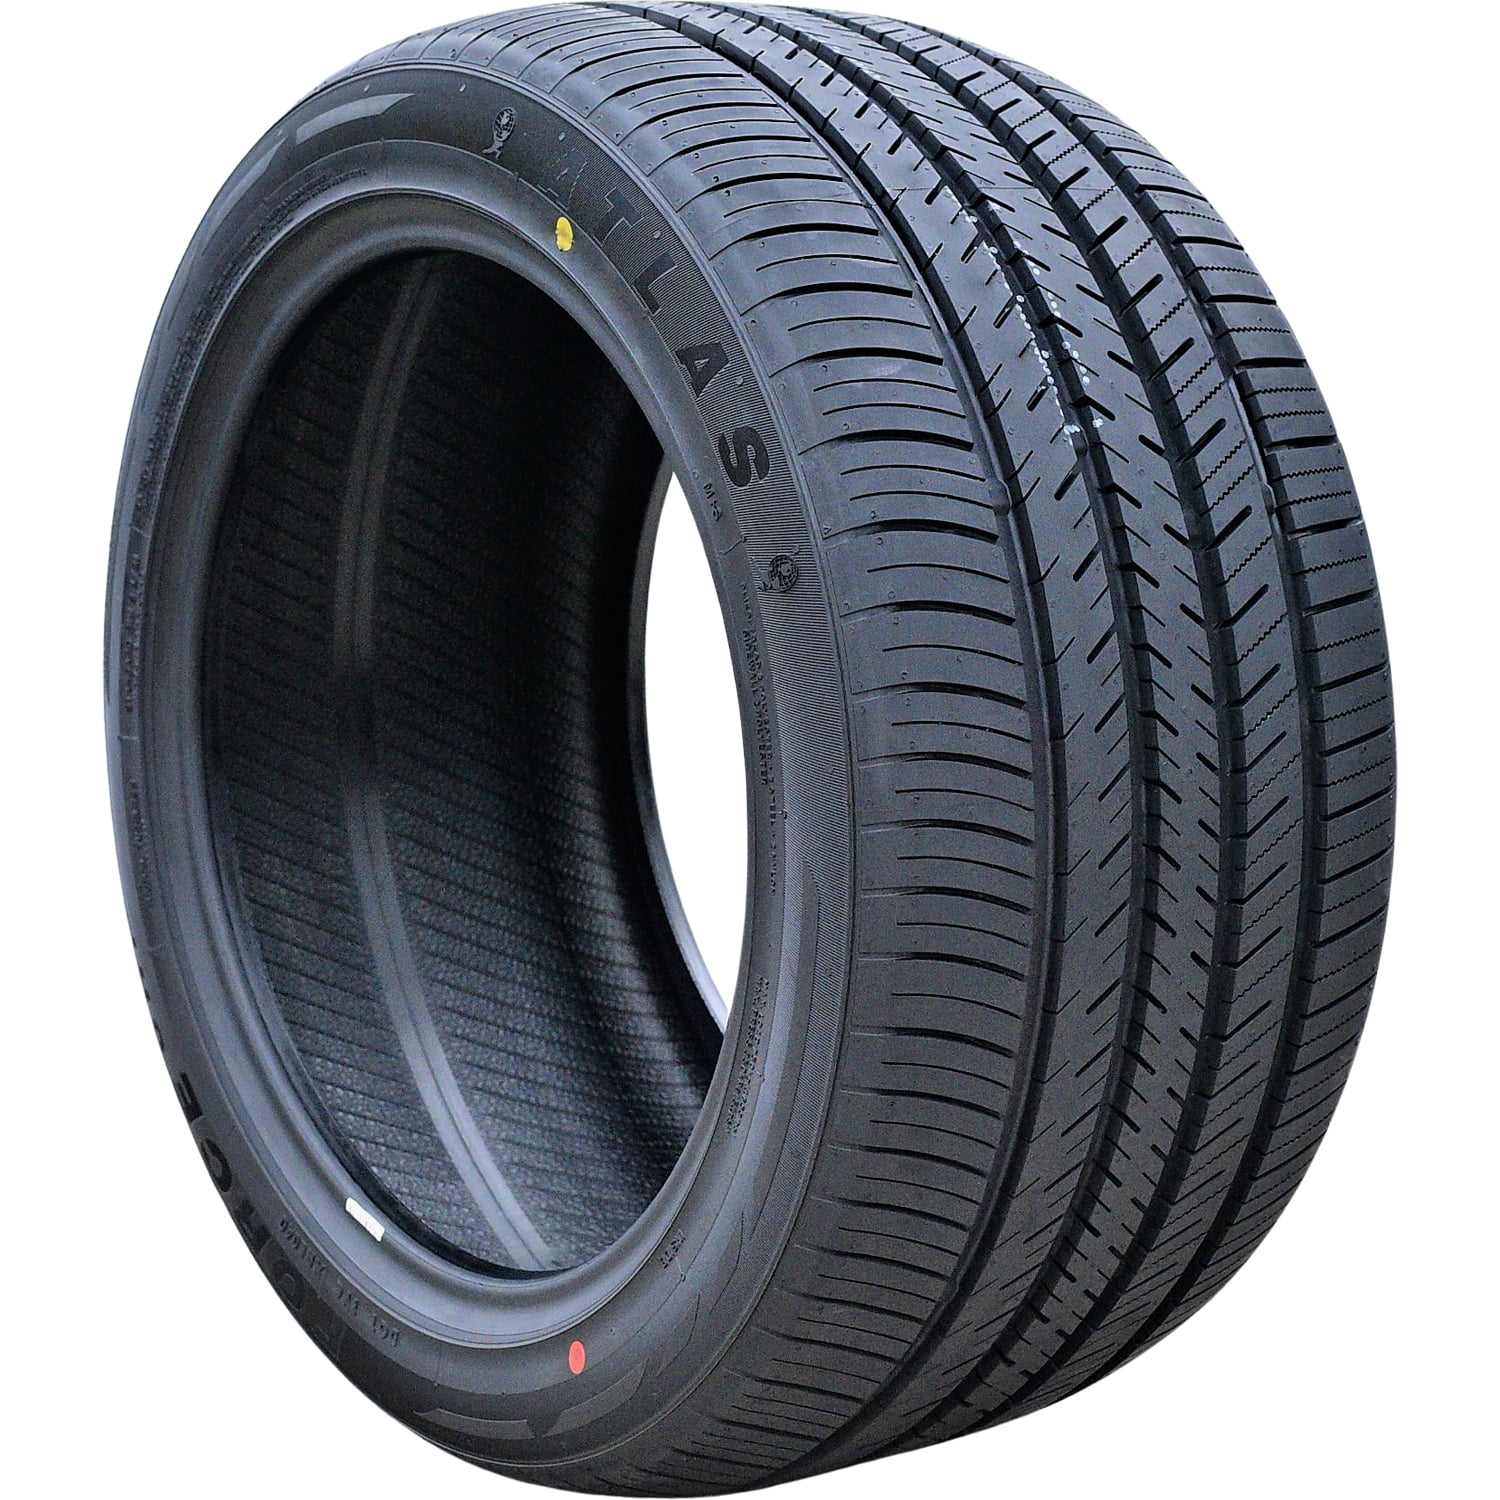 Atlas Force UHP Tire reviews and ratings